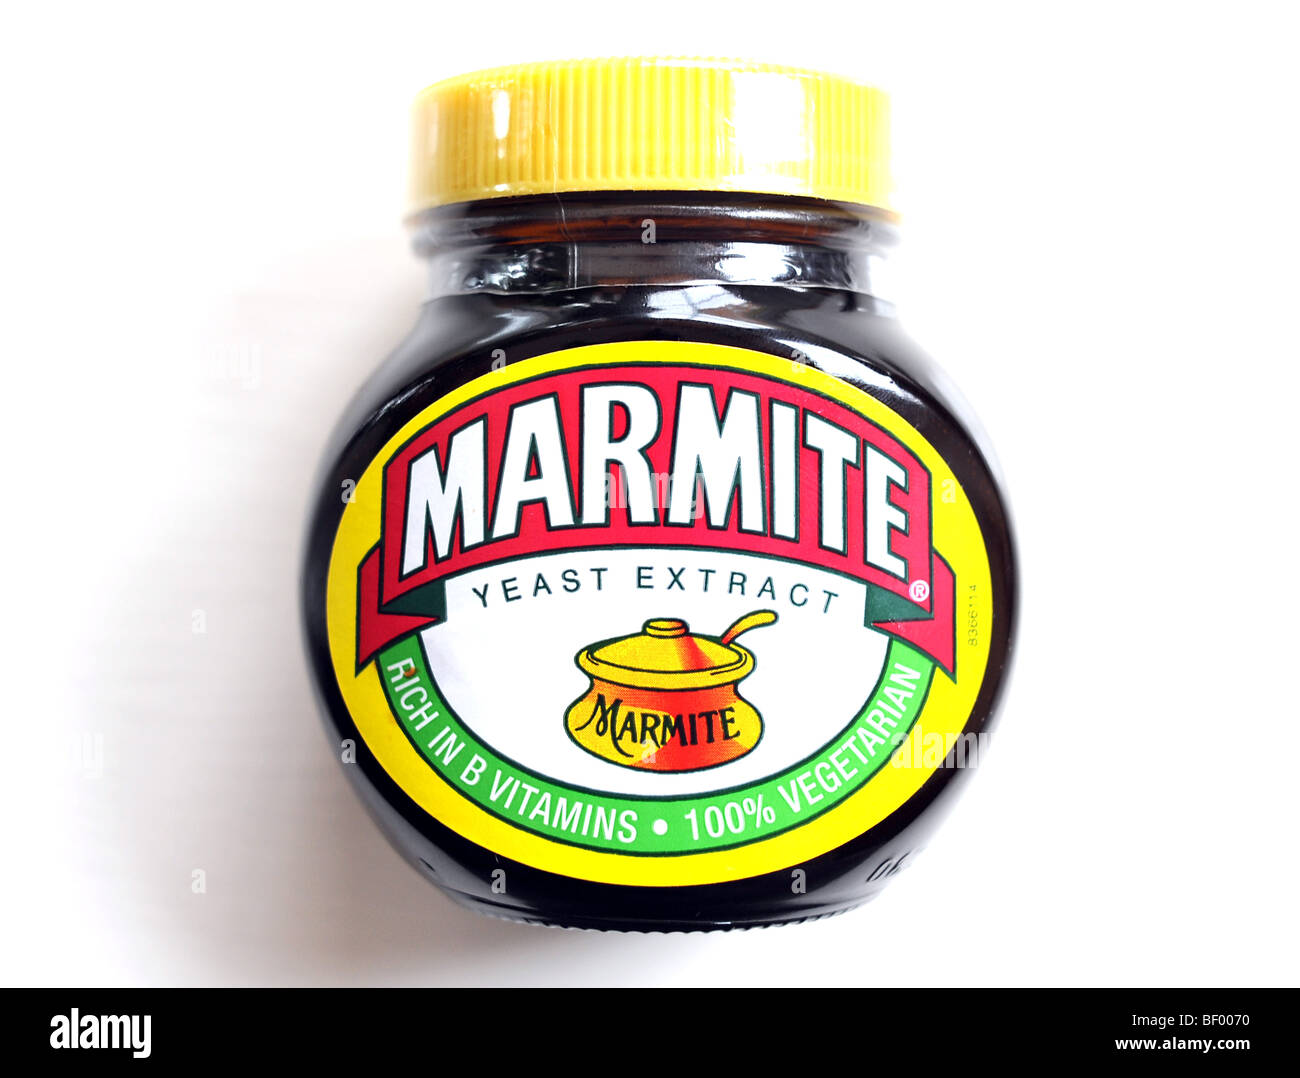 Jar of Marmite yeast extract spread for healthy diet on white background backdrop - Stock Photo